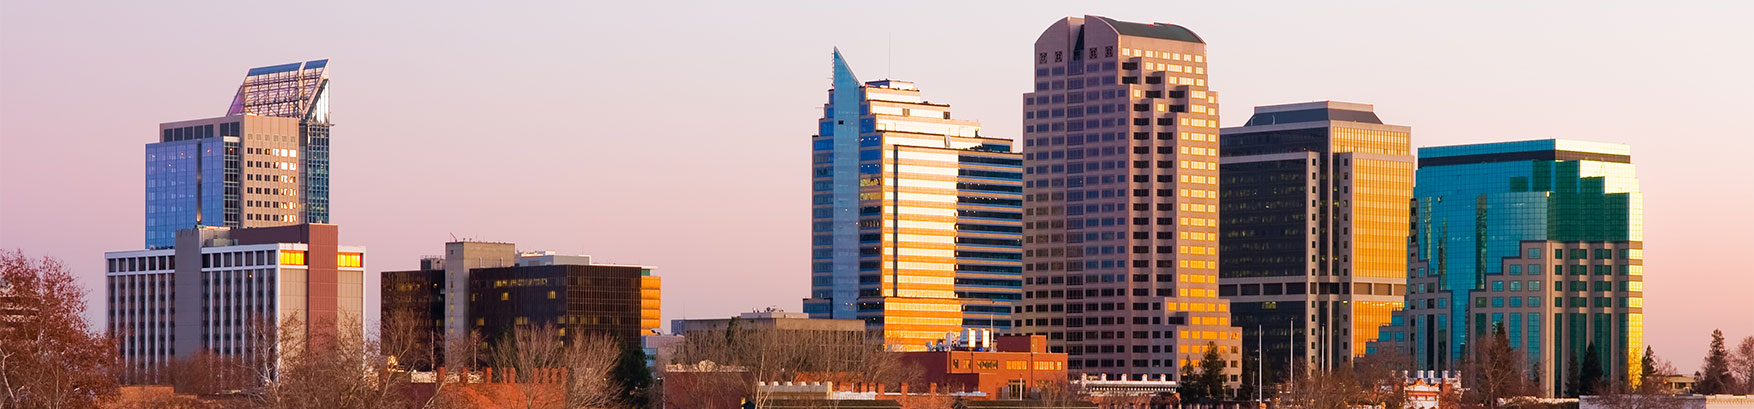 Sacramento cityscape at sunset, an area served by Sacramento car accident law firm Avrek Law